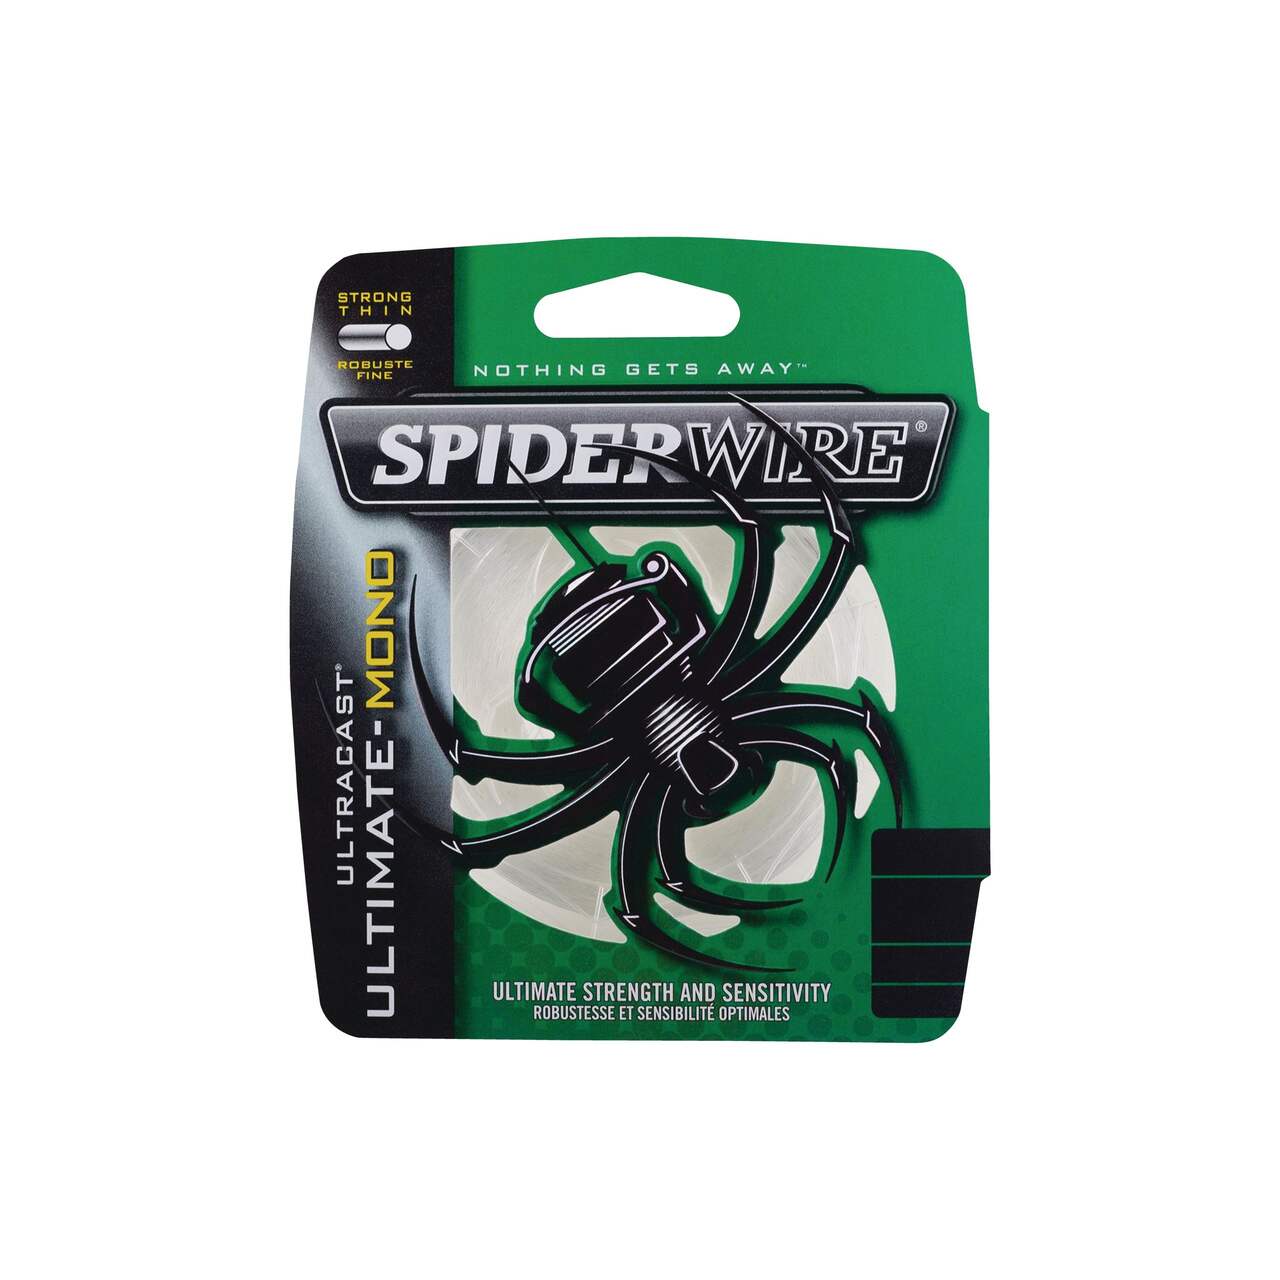 https://media-www.canadiantire.ca/product/playing/fishing/fishing-accessories/0770074/spiderwire-ultimate-mono-clear-10lb-300-yards-4ffefb00-415e-4a3d-aa11-128a3ee3be17-jpgrendition.jpg?imdensity=1&imwidth=640&impolicy=mZoom